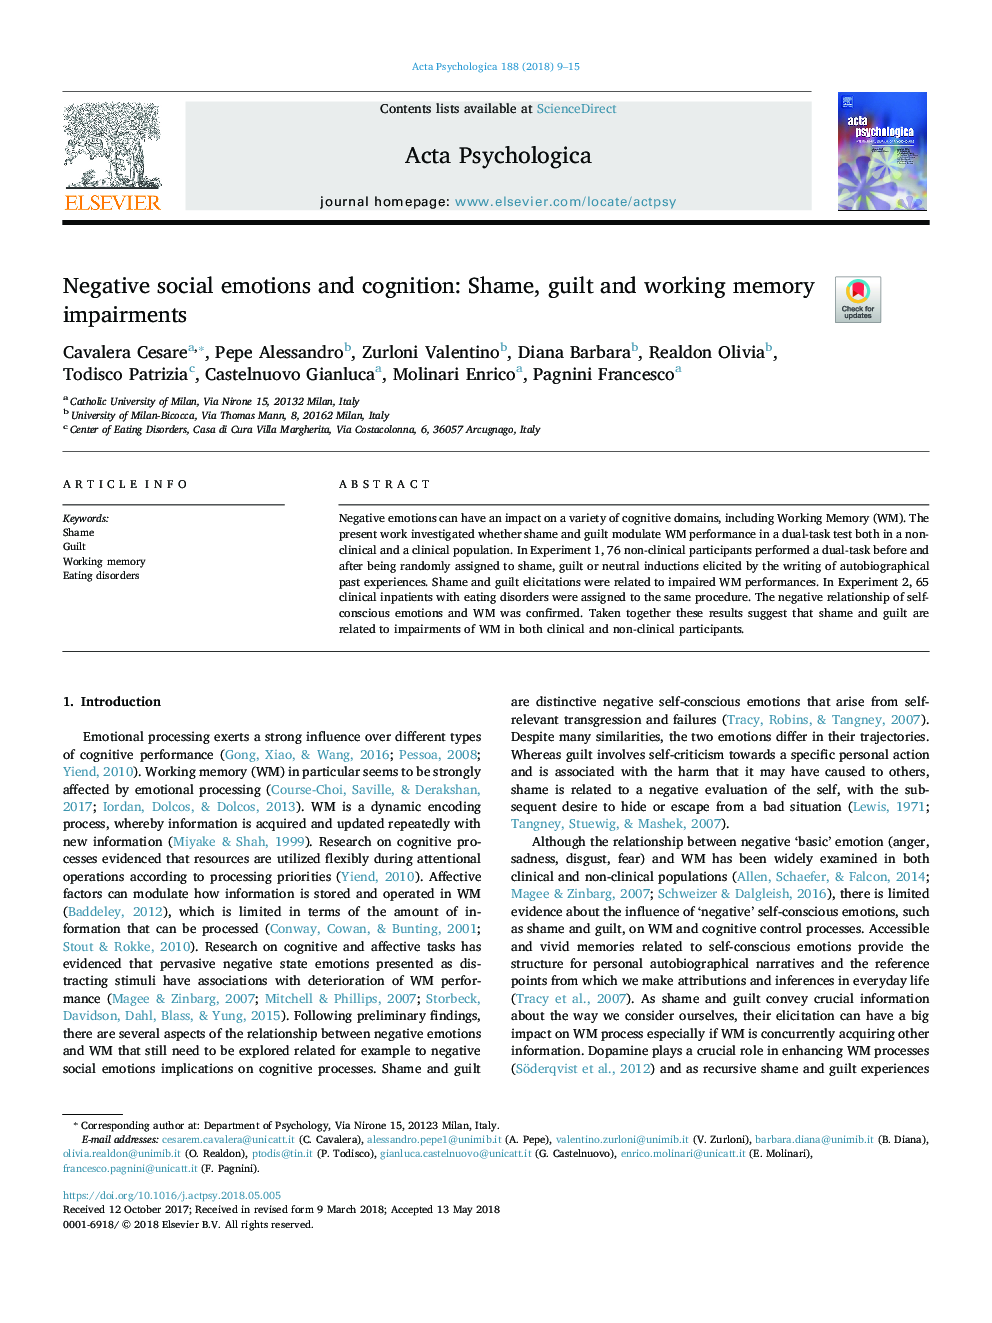 Negative social emotions and cognition: Shame, guilt and working memory impairments